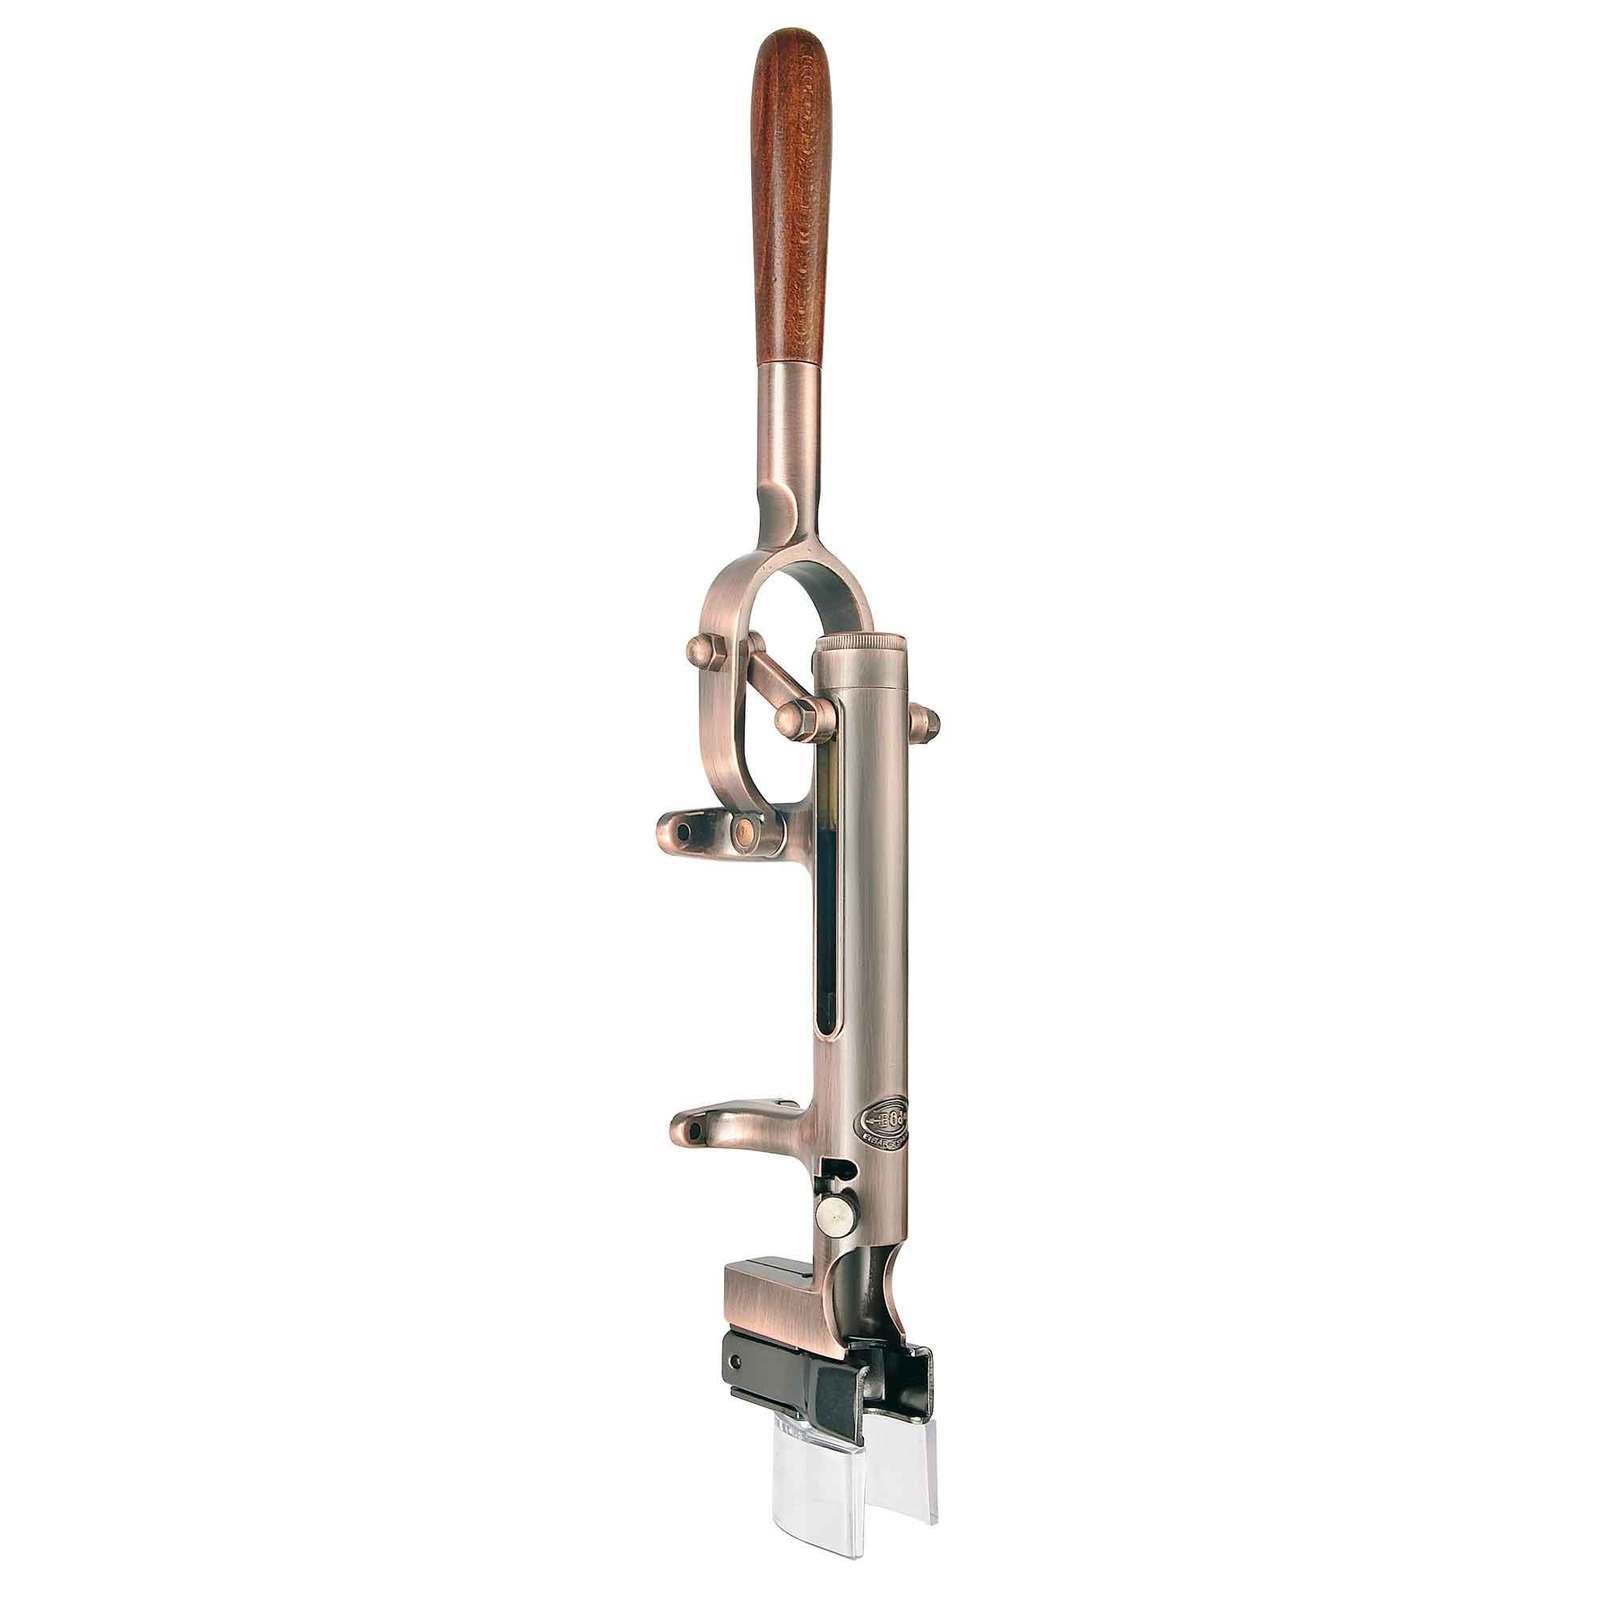 BOJ 00992504 - Traditional Wall-Mounted Wine Opener - Old Coppered - $172.79